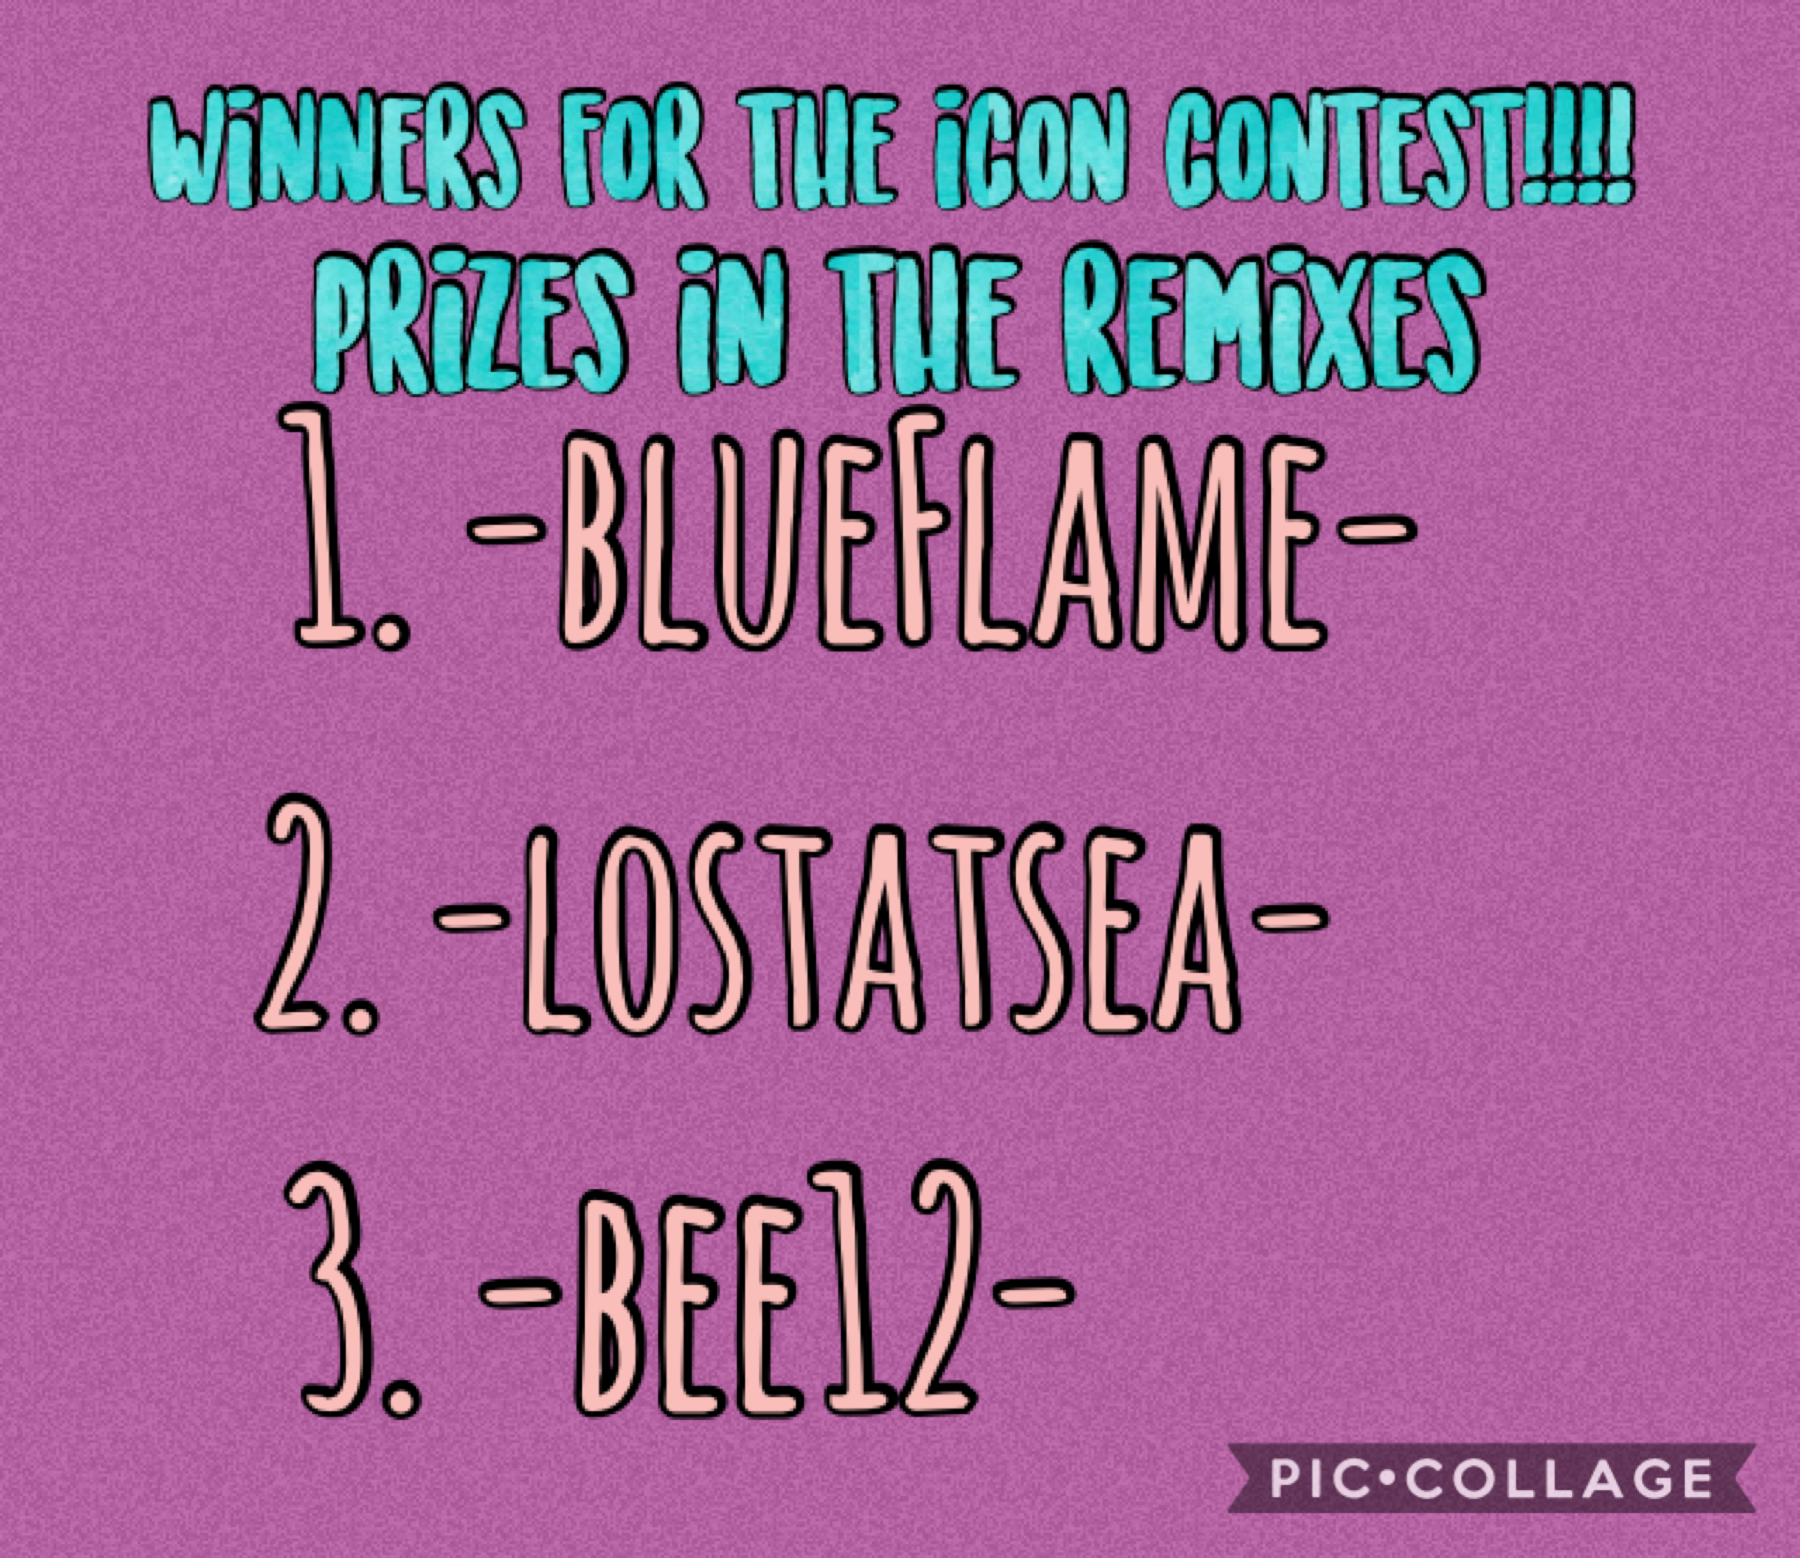 Prizes in the remix
